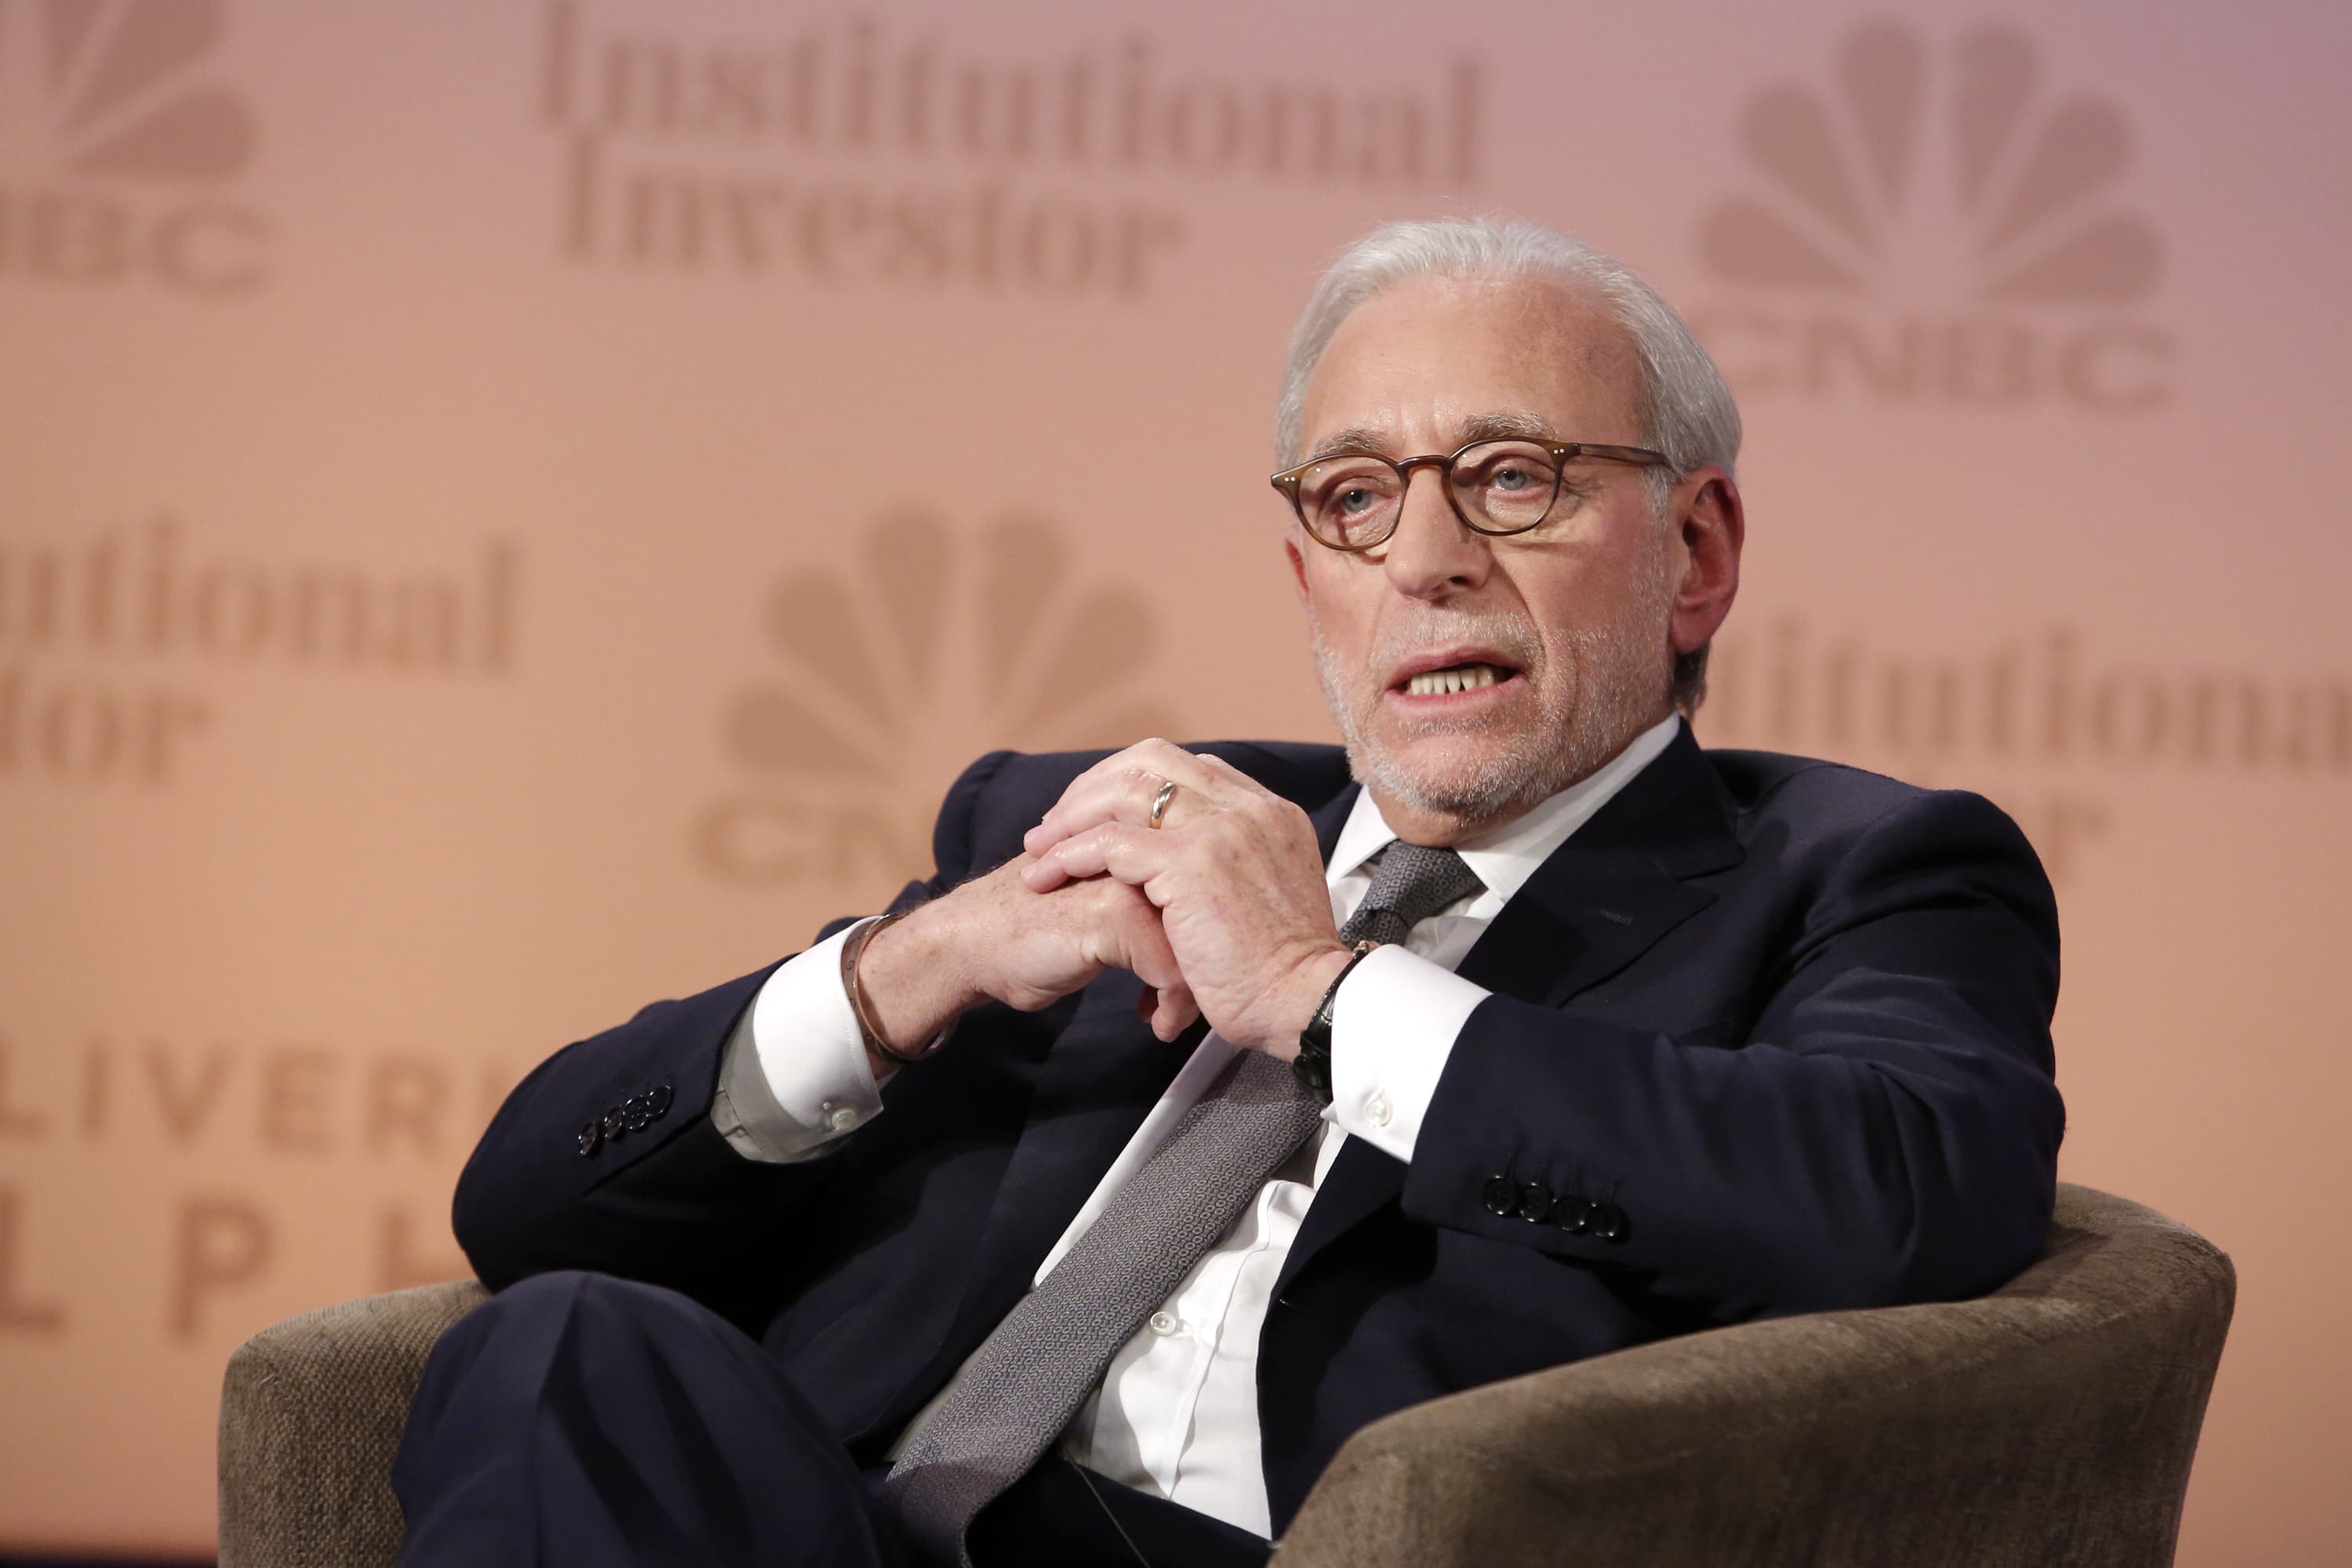 Nelson Peltz is not giving up the proxy fight